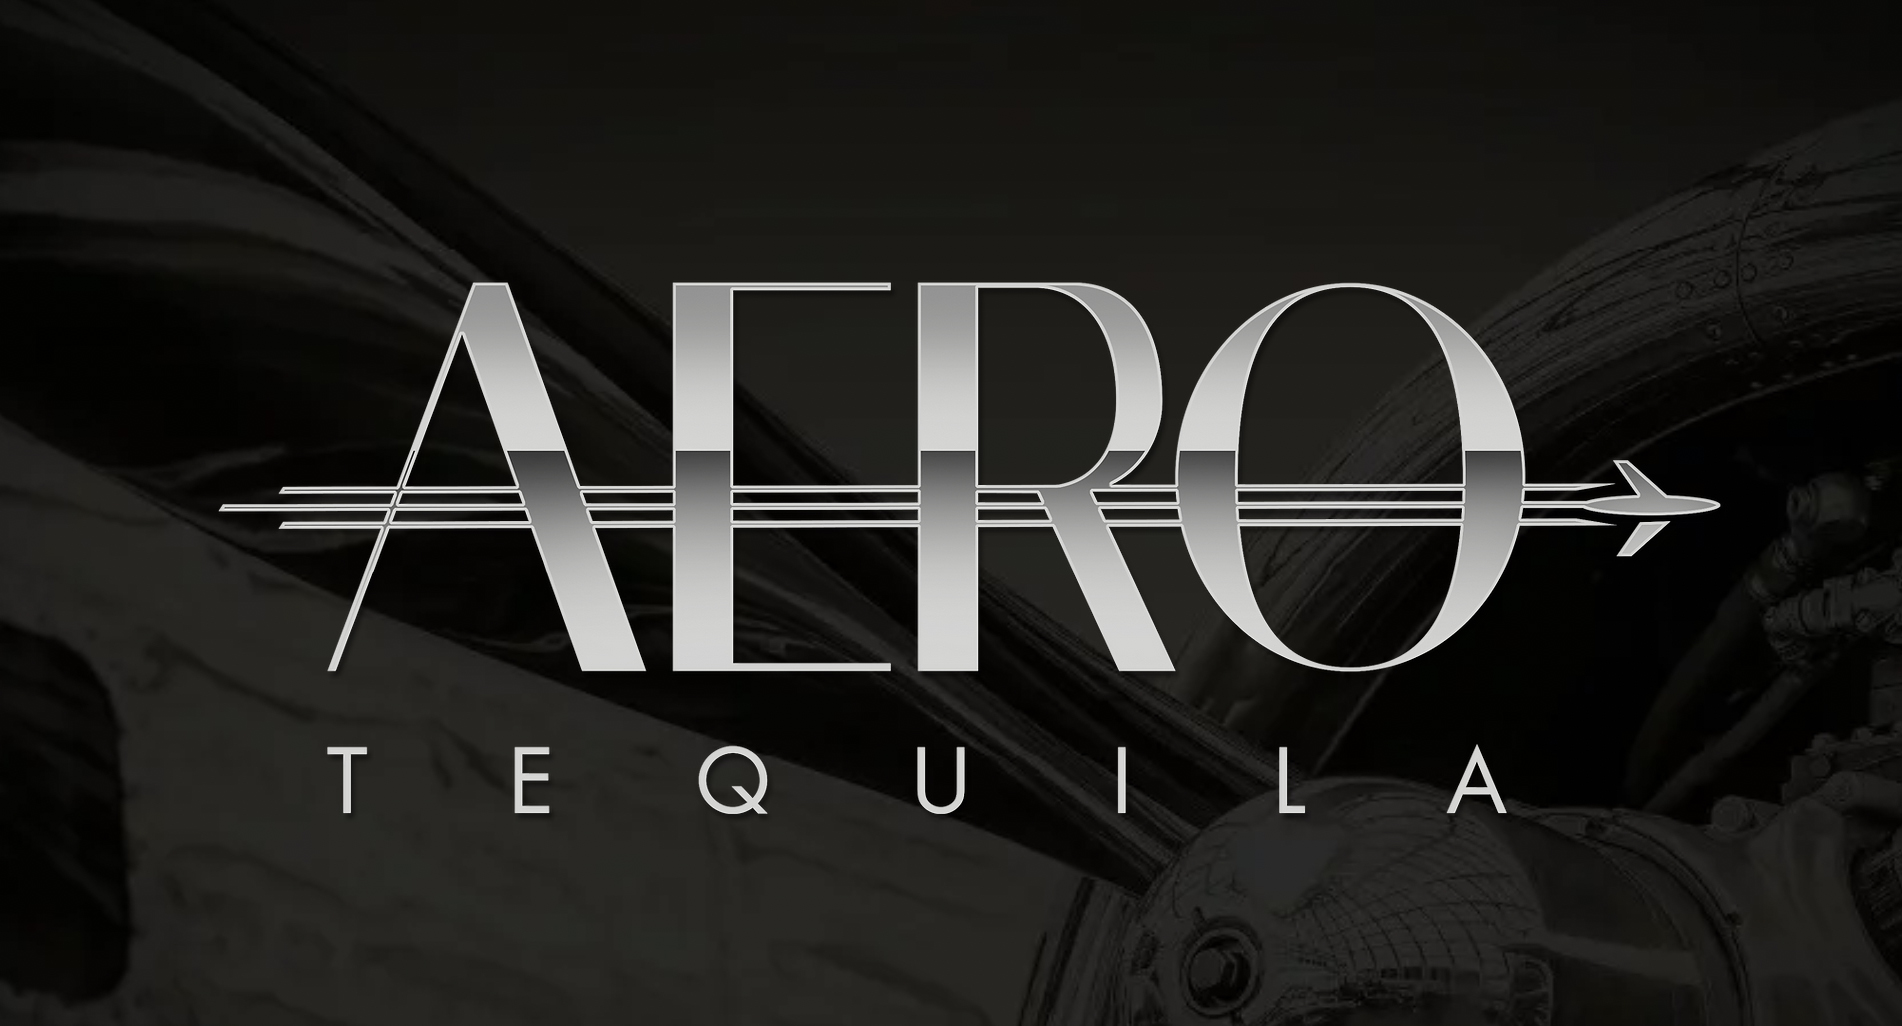 A Private Equity Firm Has Launched A Tequila To Offset Airplane Carbon Emissions AERO